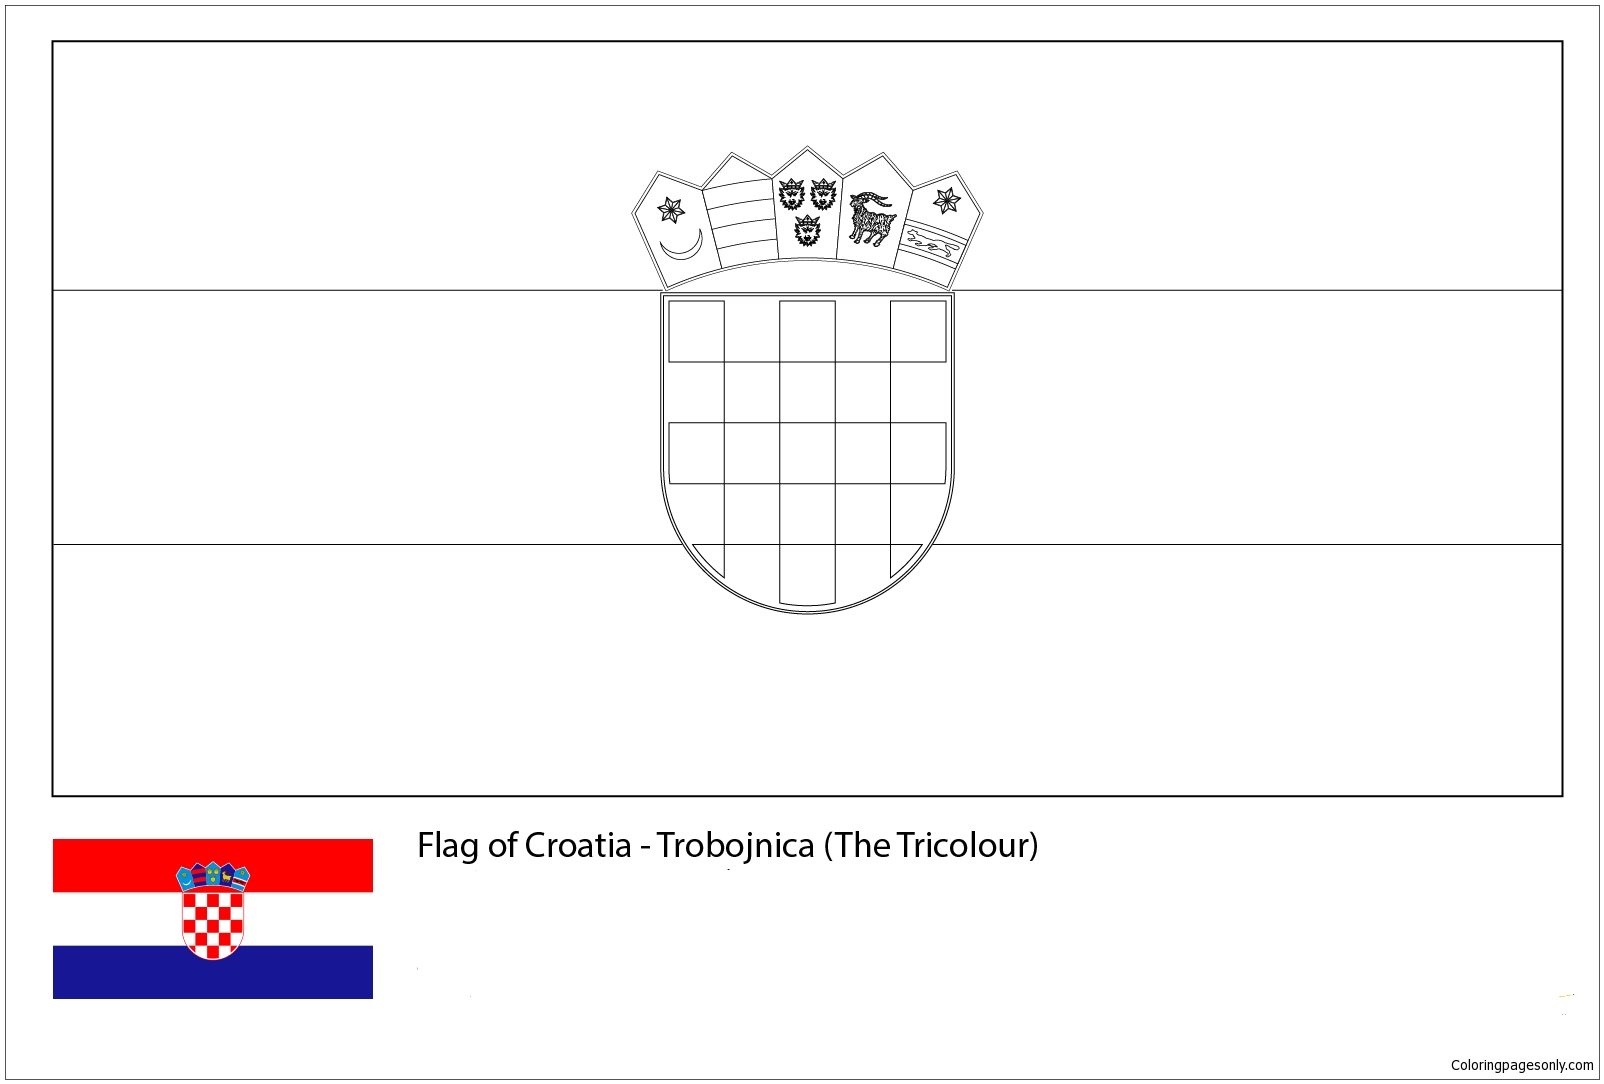 Flag of Croatia-World Cup 2018 from World Cup 2018 Flags